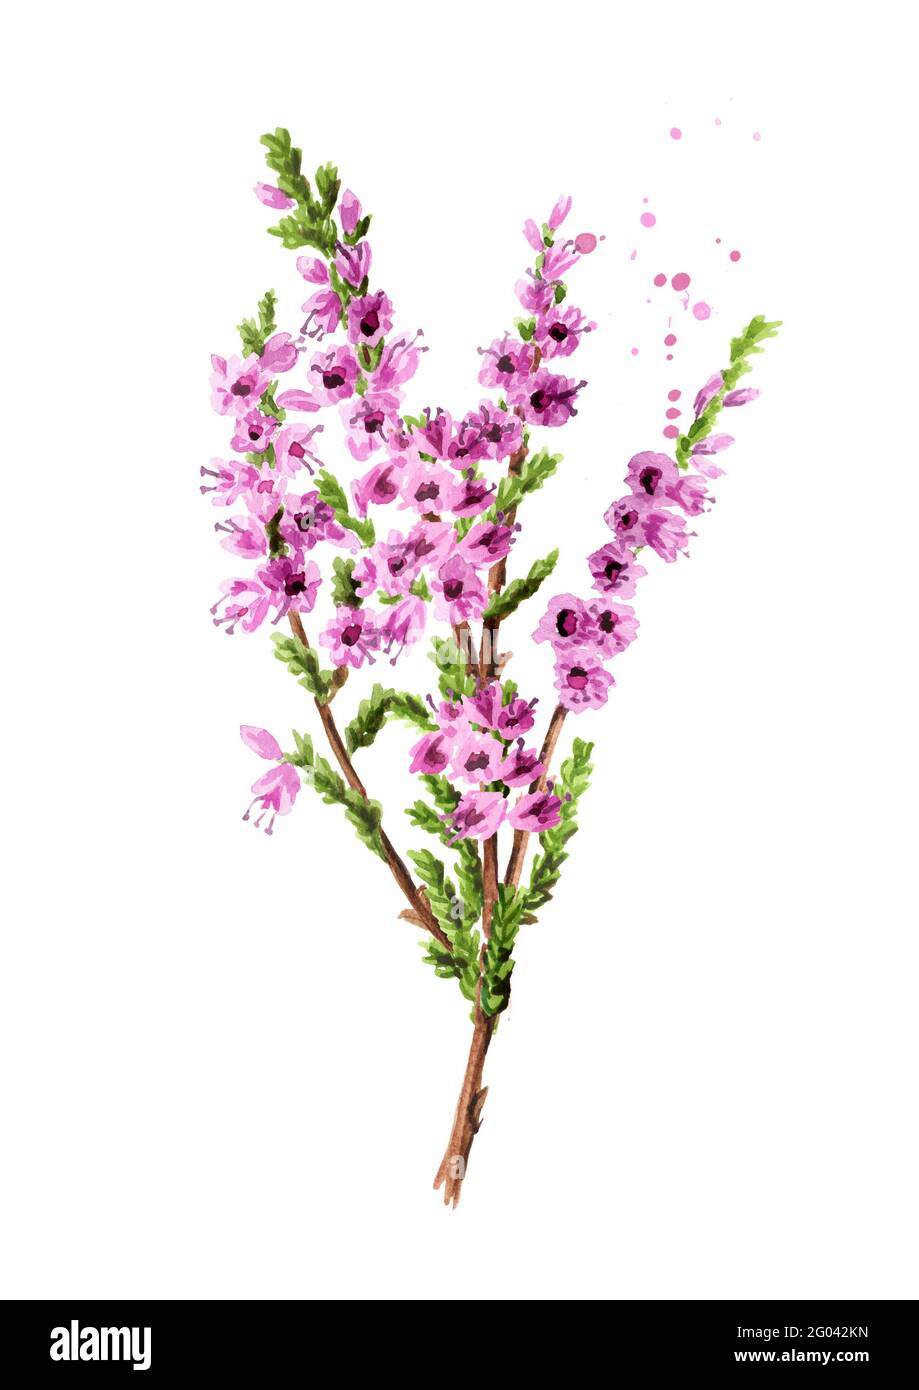 Branch of heather with purple flowers, symbol of good luck. Watercolor hand drawn illustration isolated on white background Stock Photo